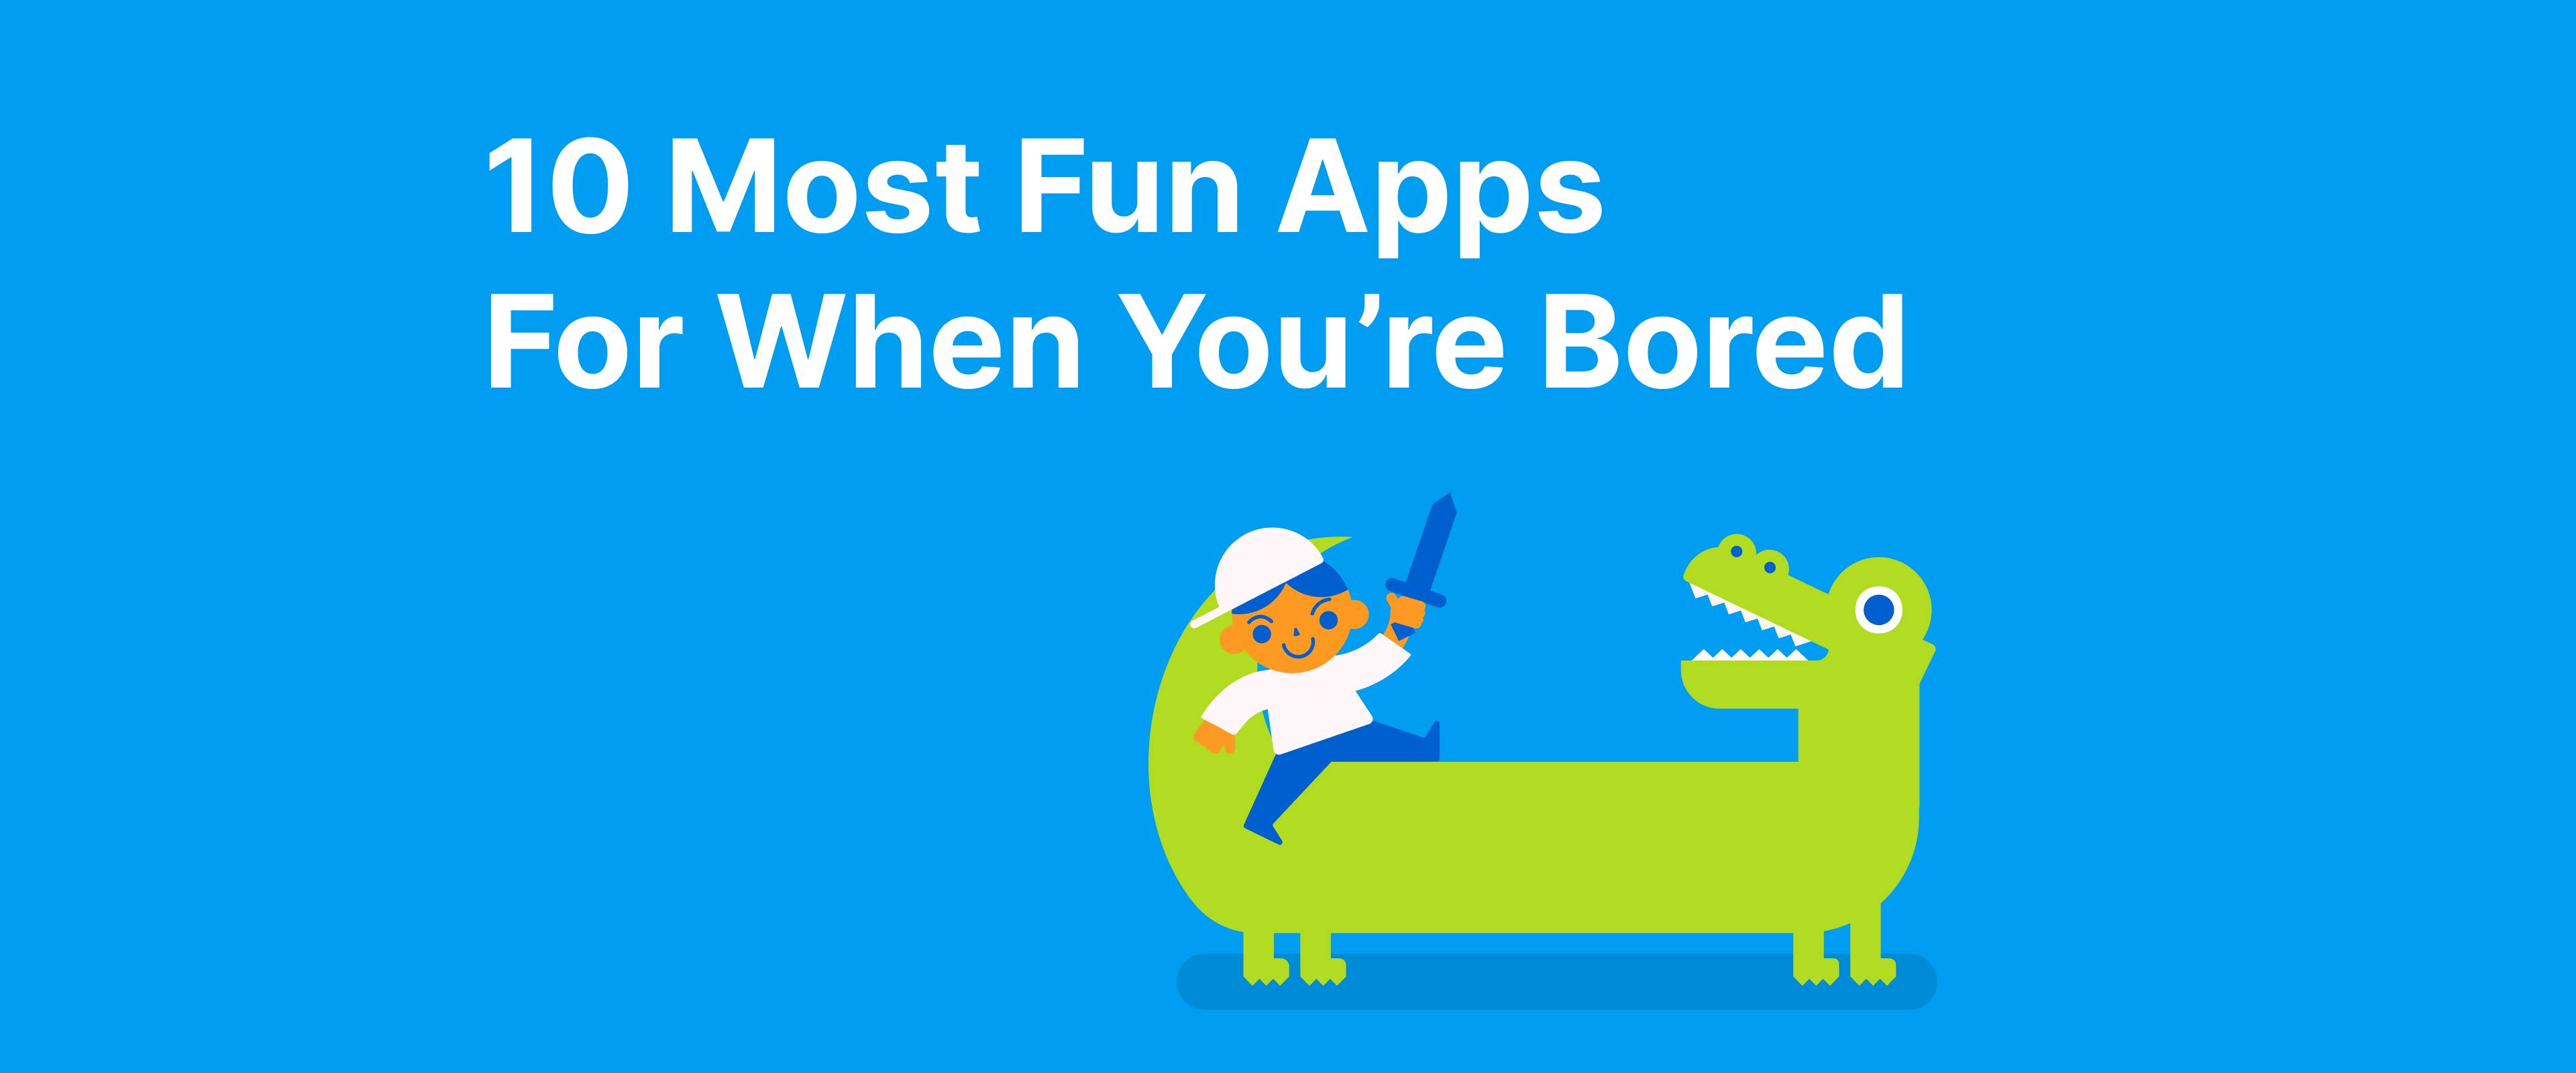 10 Most Fun Apps For When You’re Bored - Headway App